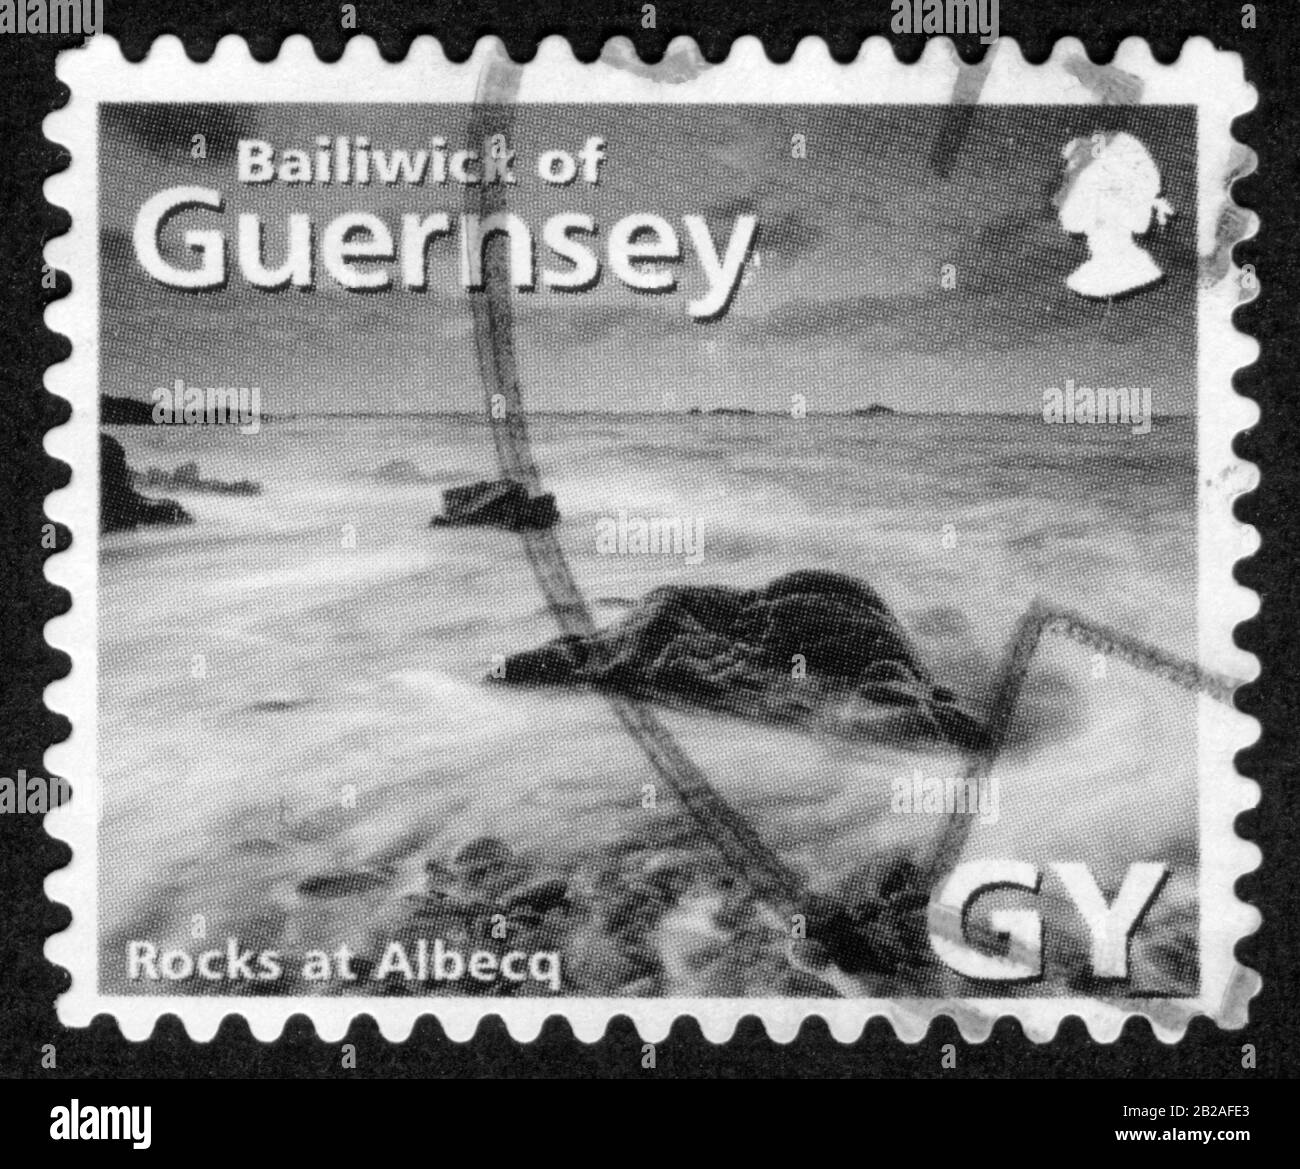 Guernsey mail Black and White Stock Photos & Images - Alamy